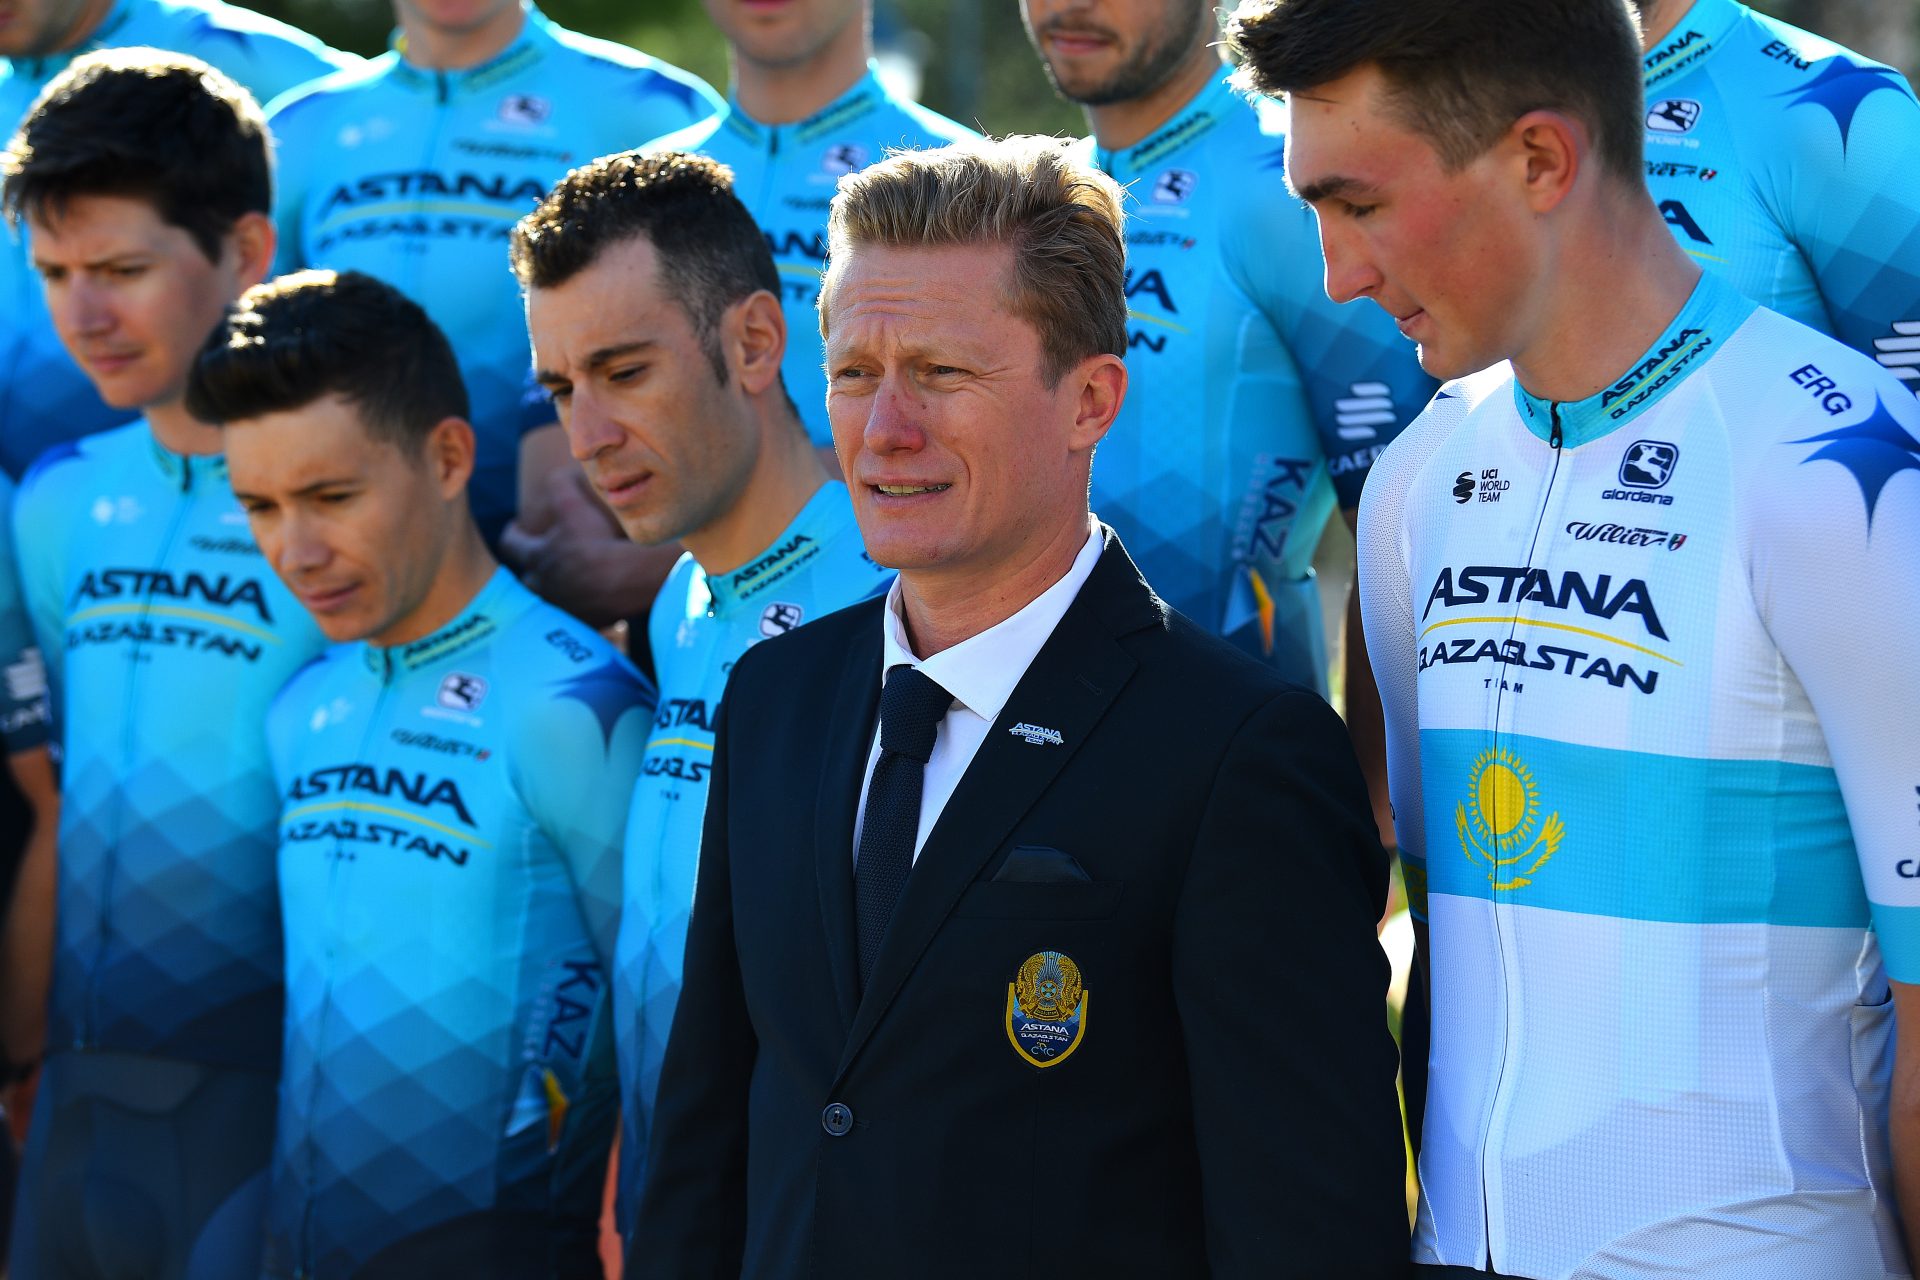 2021: departure from Astana